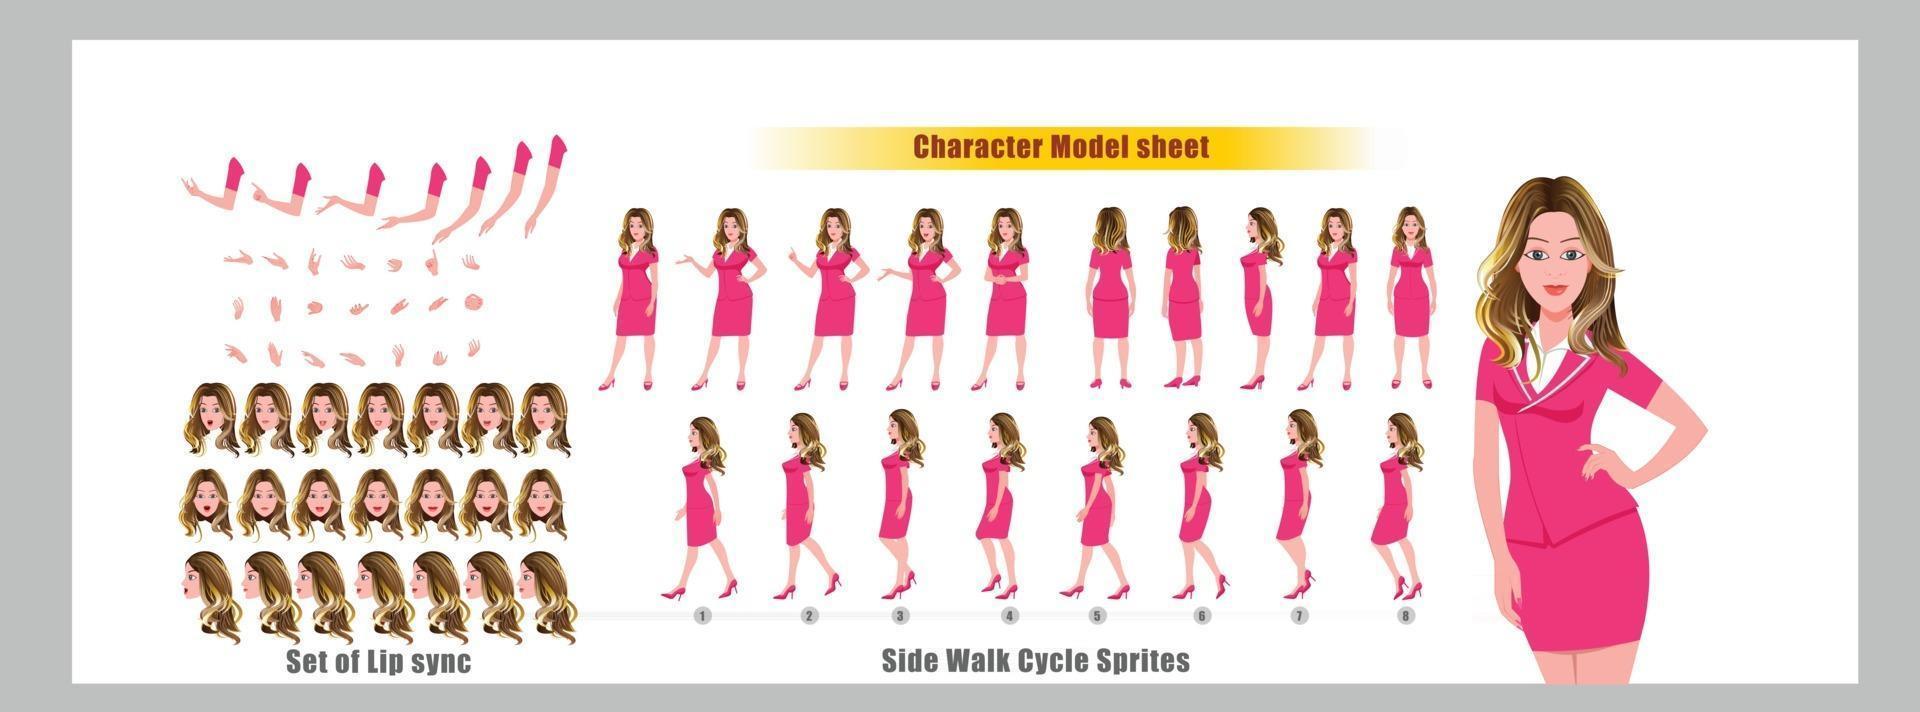 Blond hair Girl Character Design Model Sheet Girl Character design Front side back view and explainer animation poses Character set with lip sync Animation sequence of all front Back and side walk cycle animation sequences vector